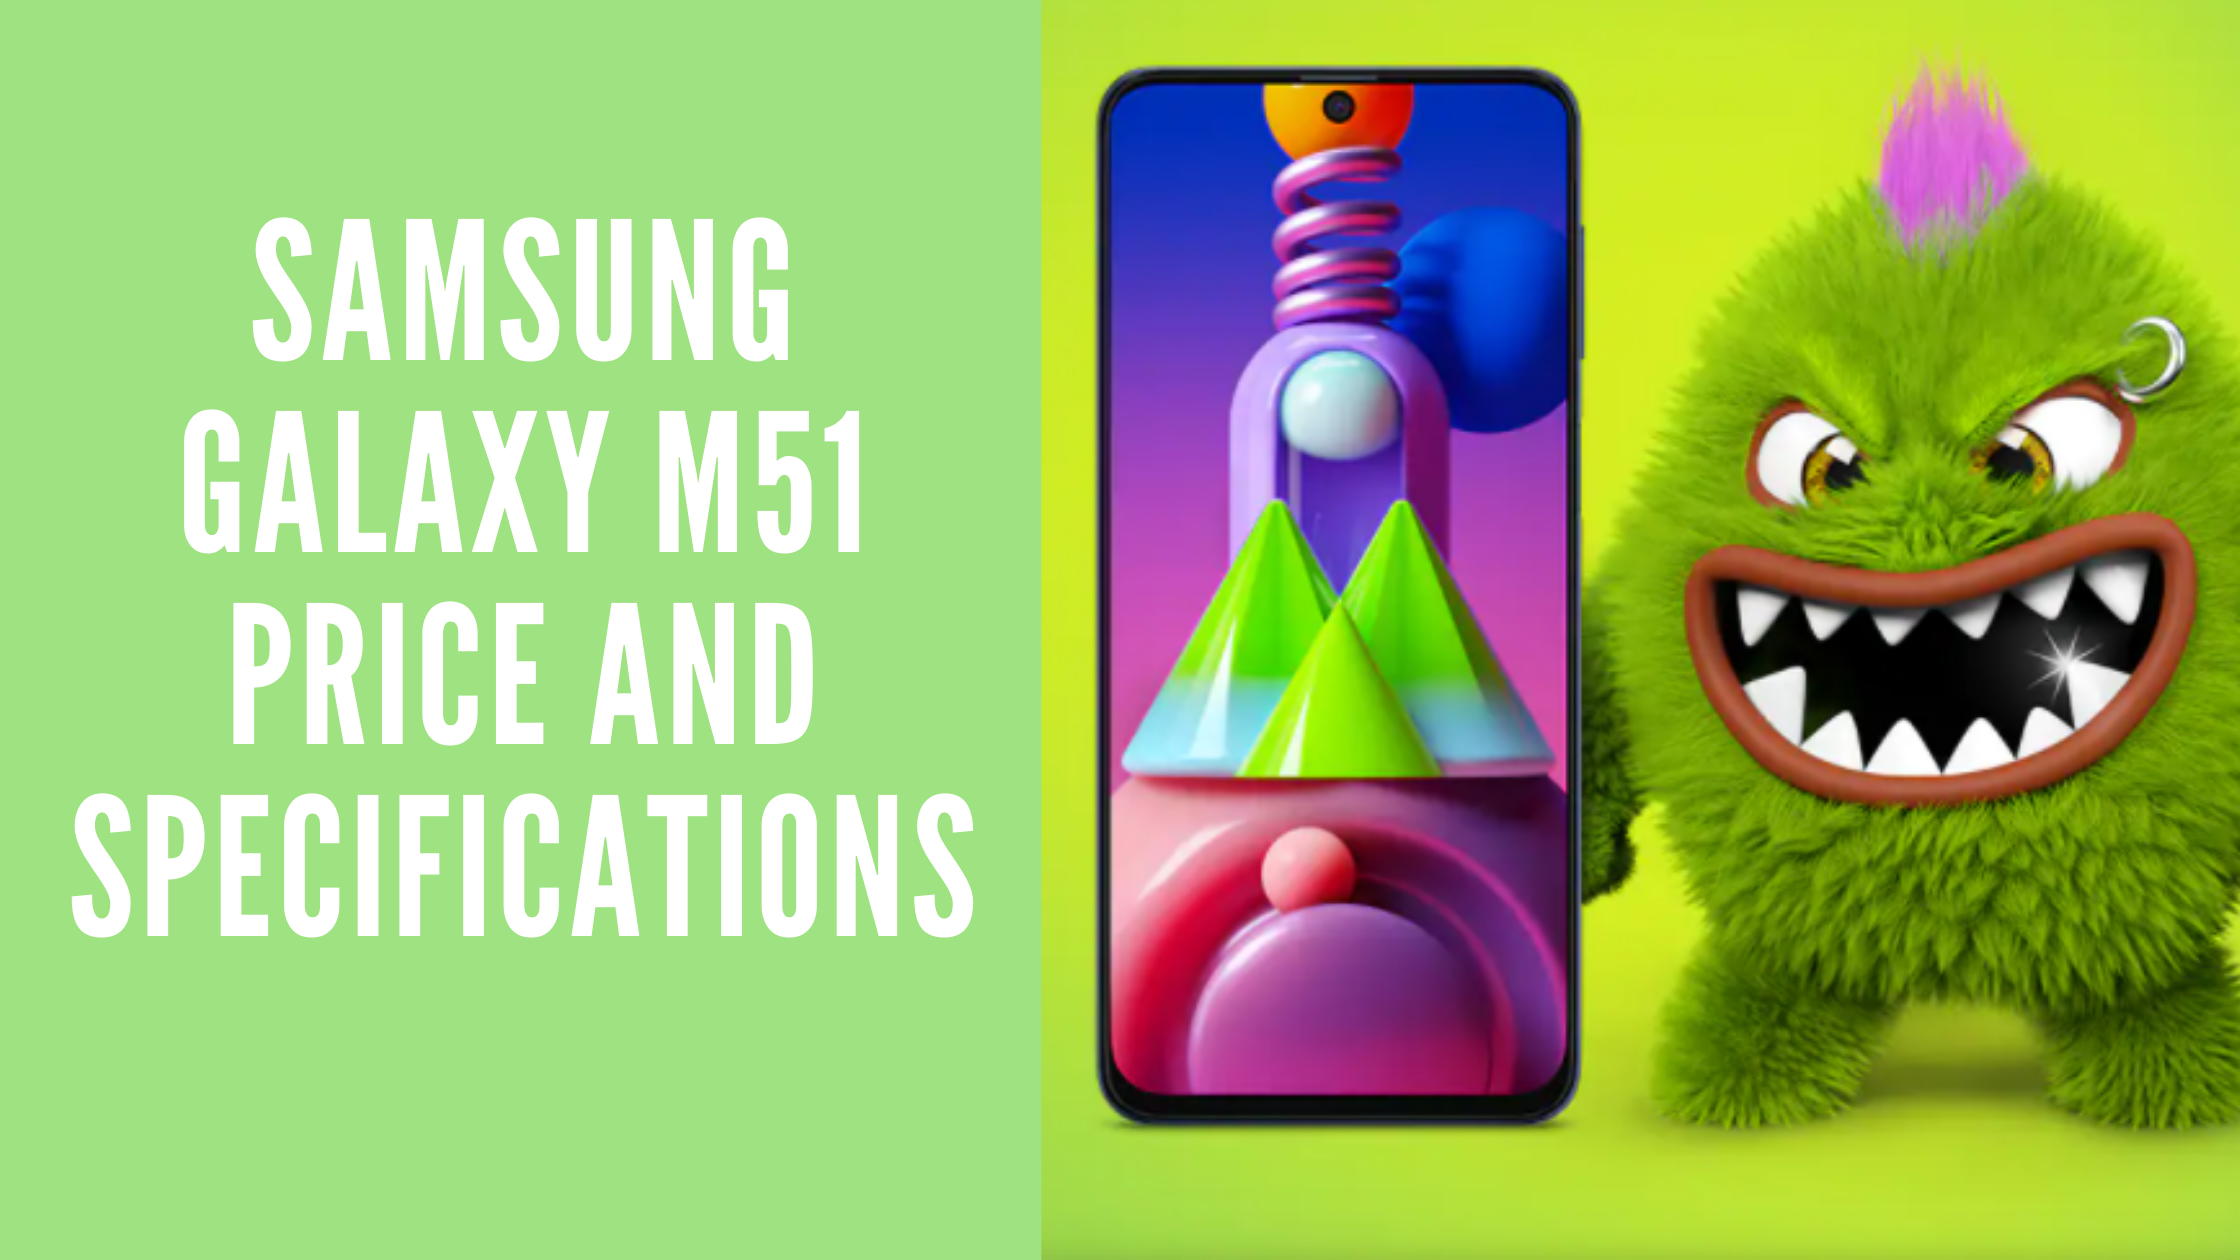 samsung galaxy m51 price and specifications